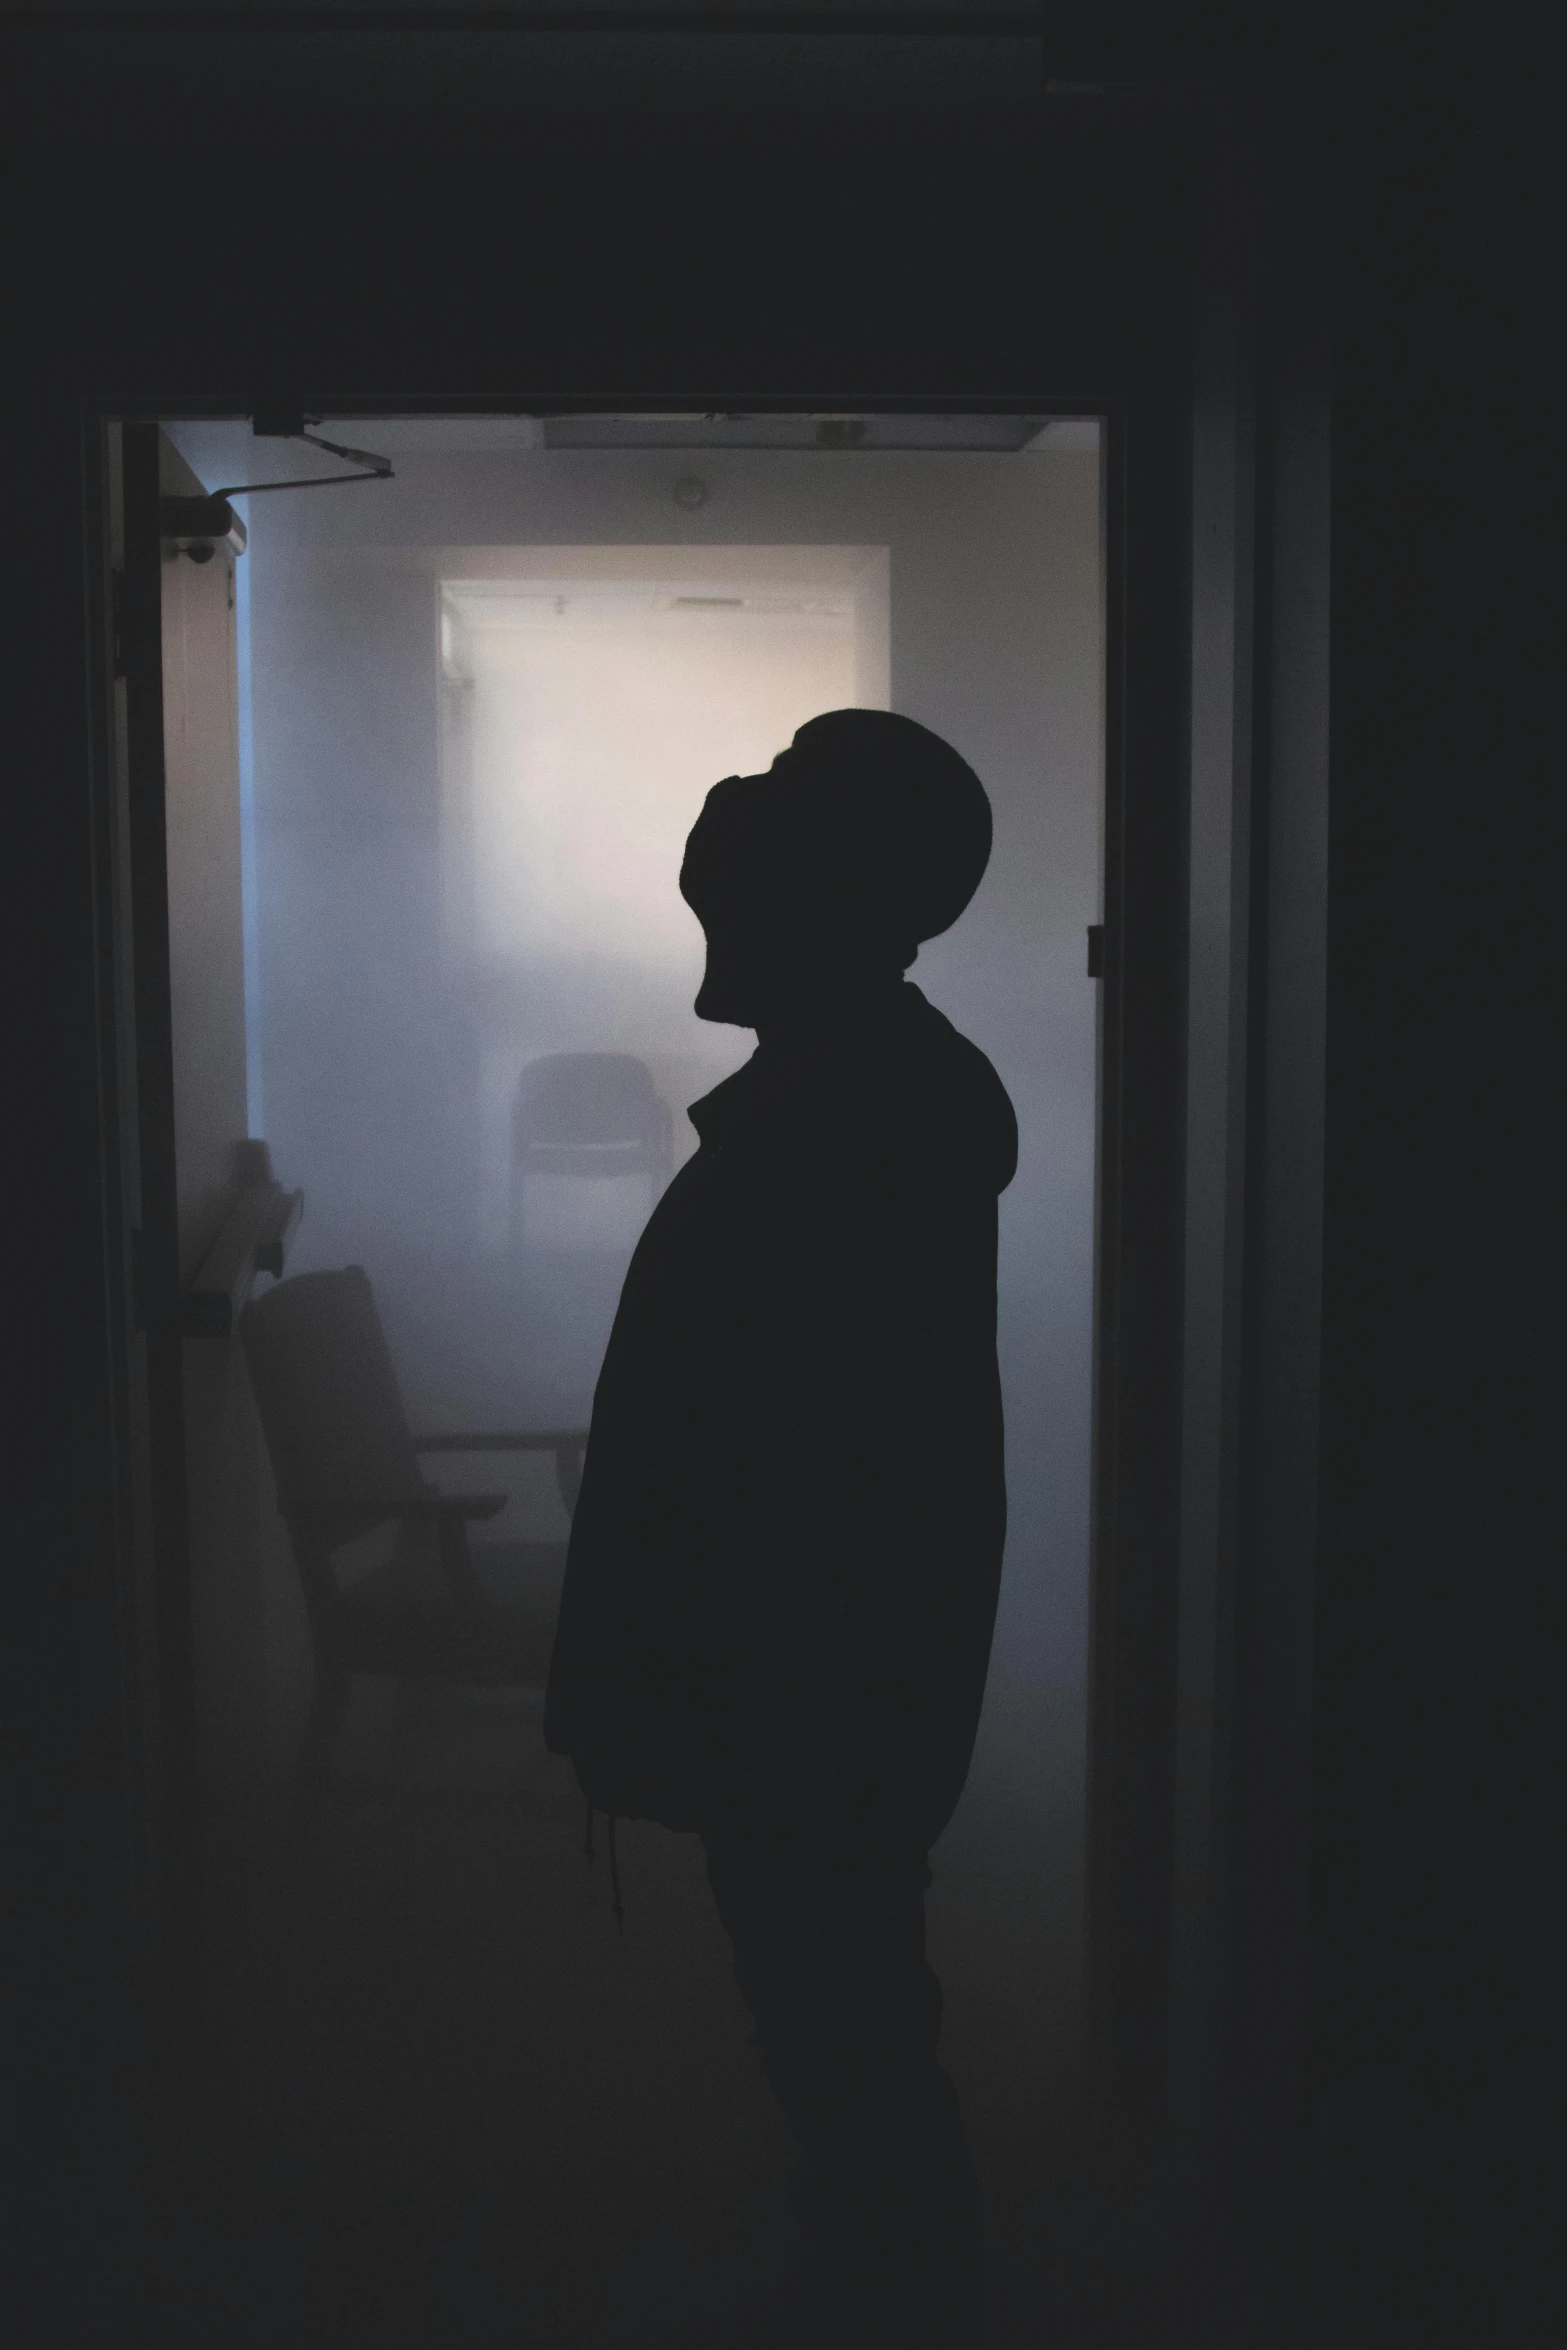 a silhouette of a person standing in a dark room, by Ryan Pancoast, dark visor covering face, in a foggy office, teenage boy, stood in a lab